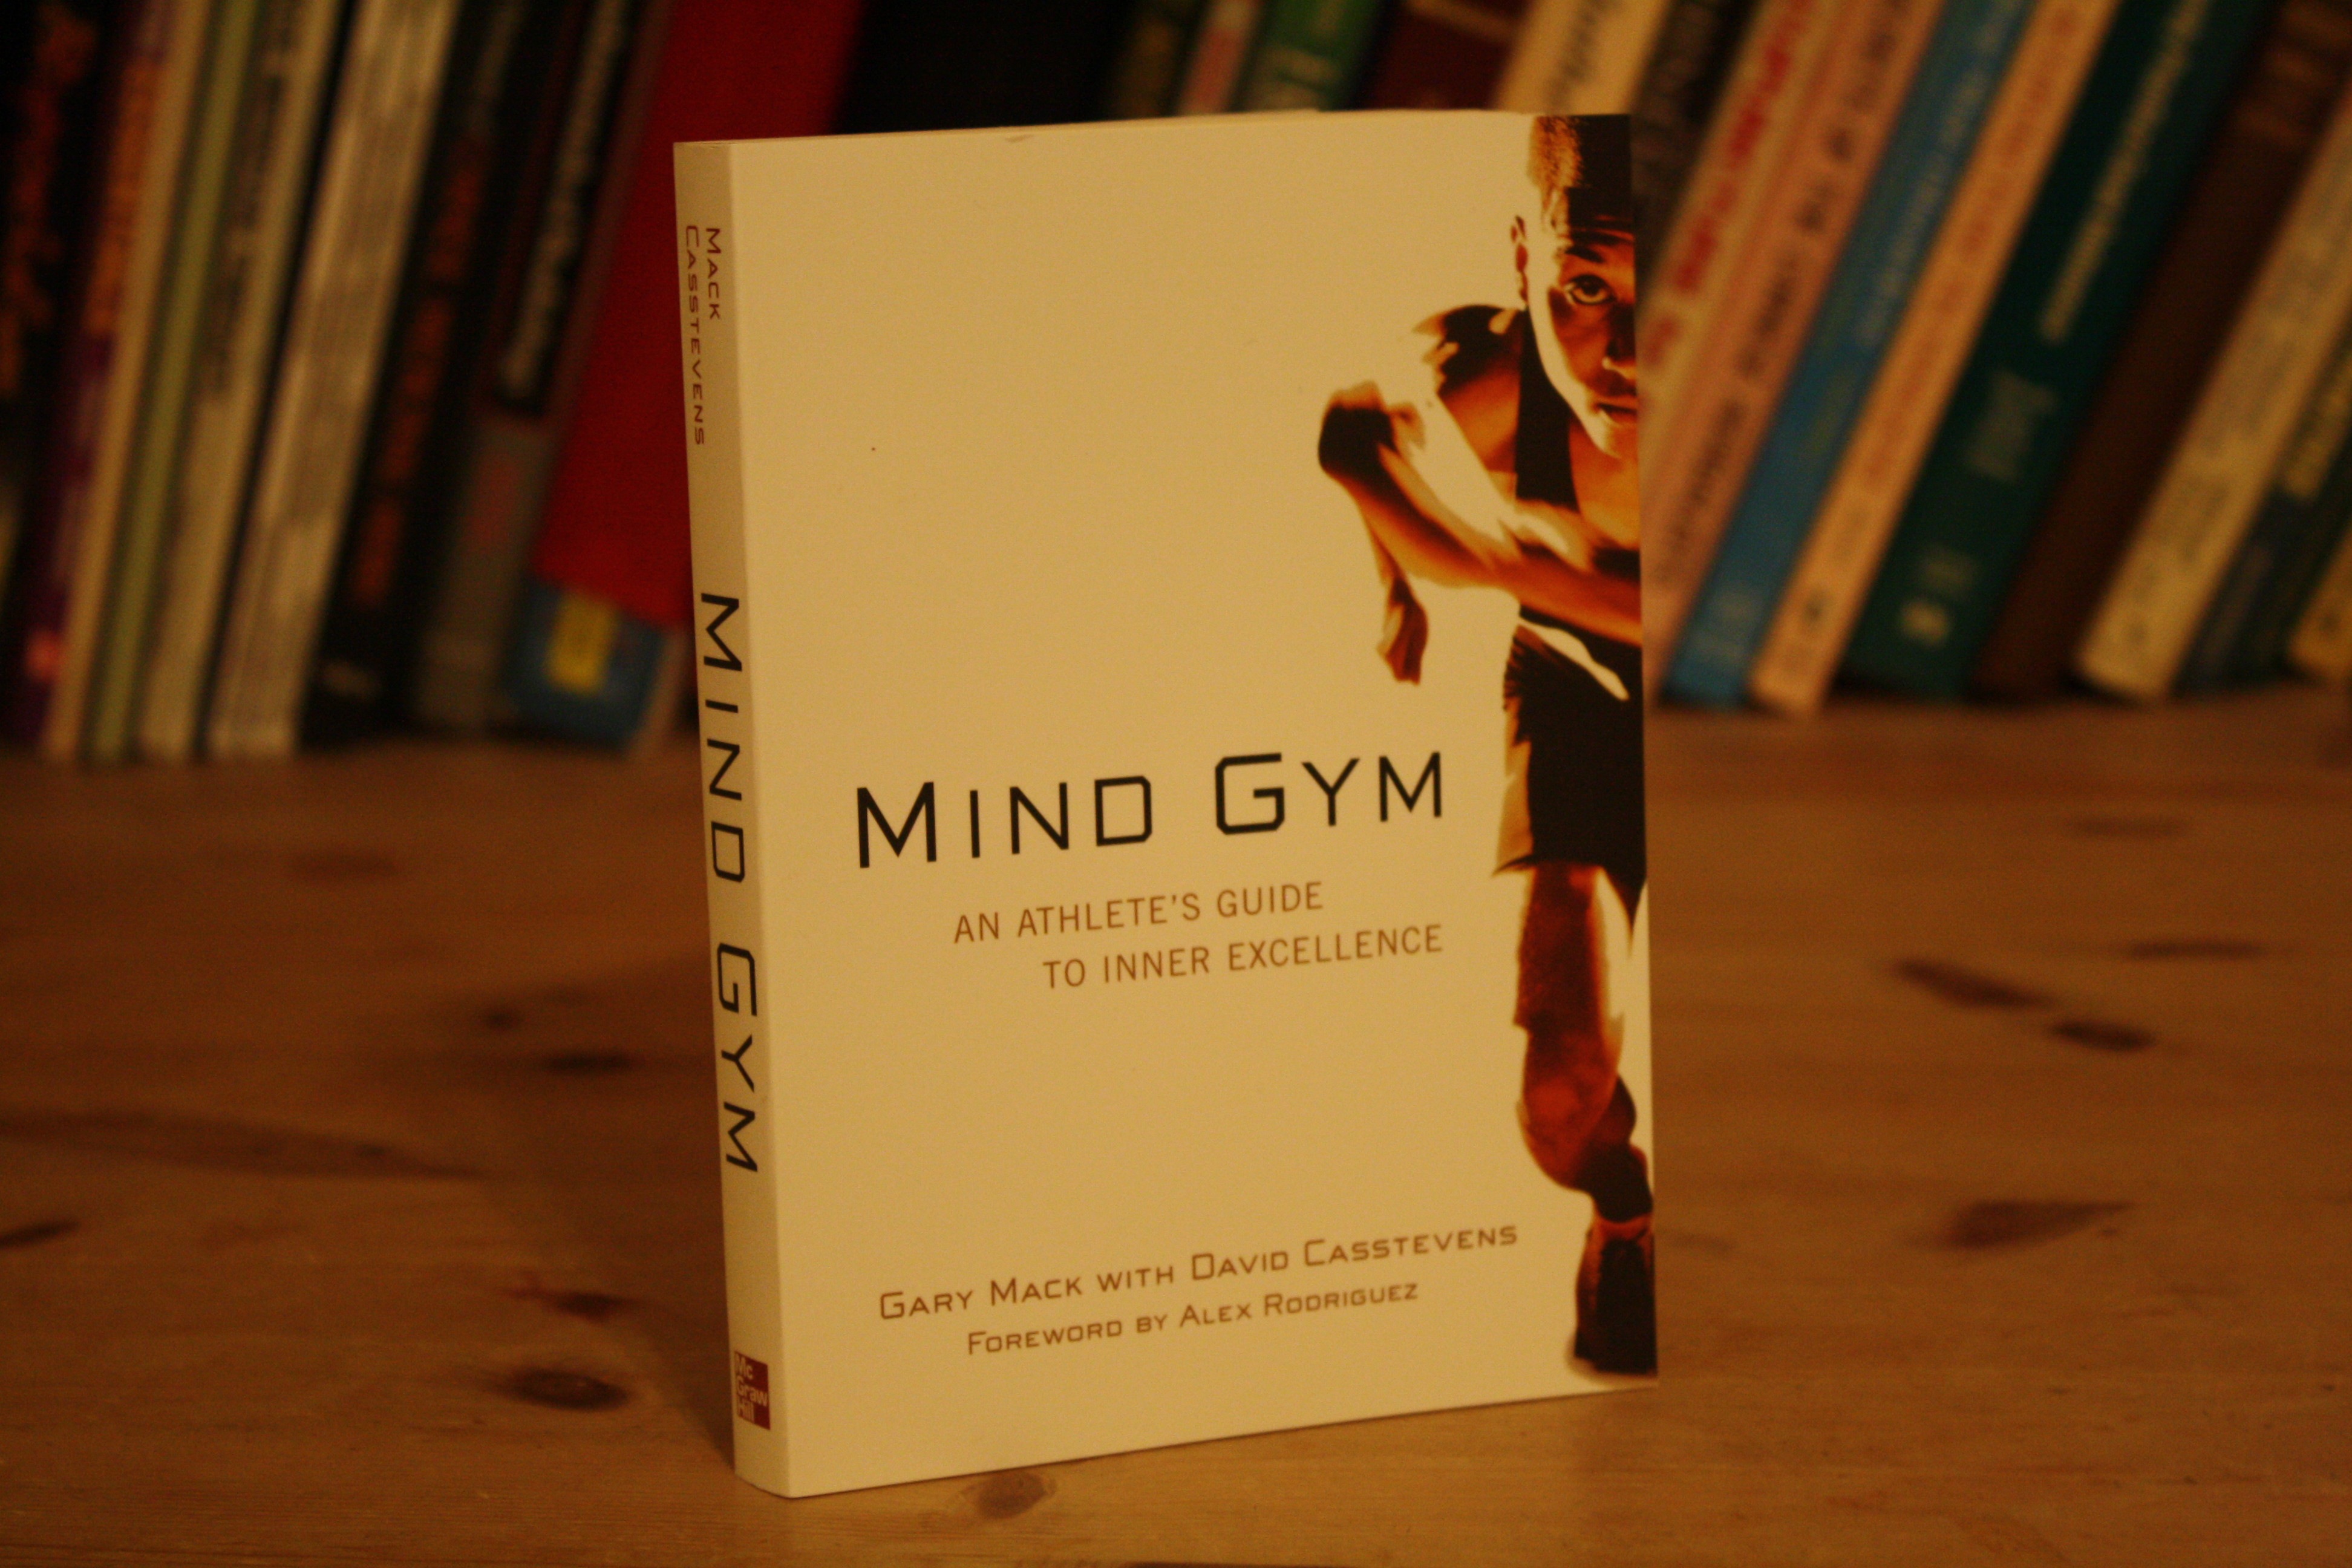 mind gym an athlete's guide to inner excellence